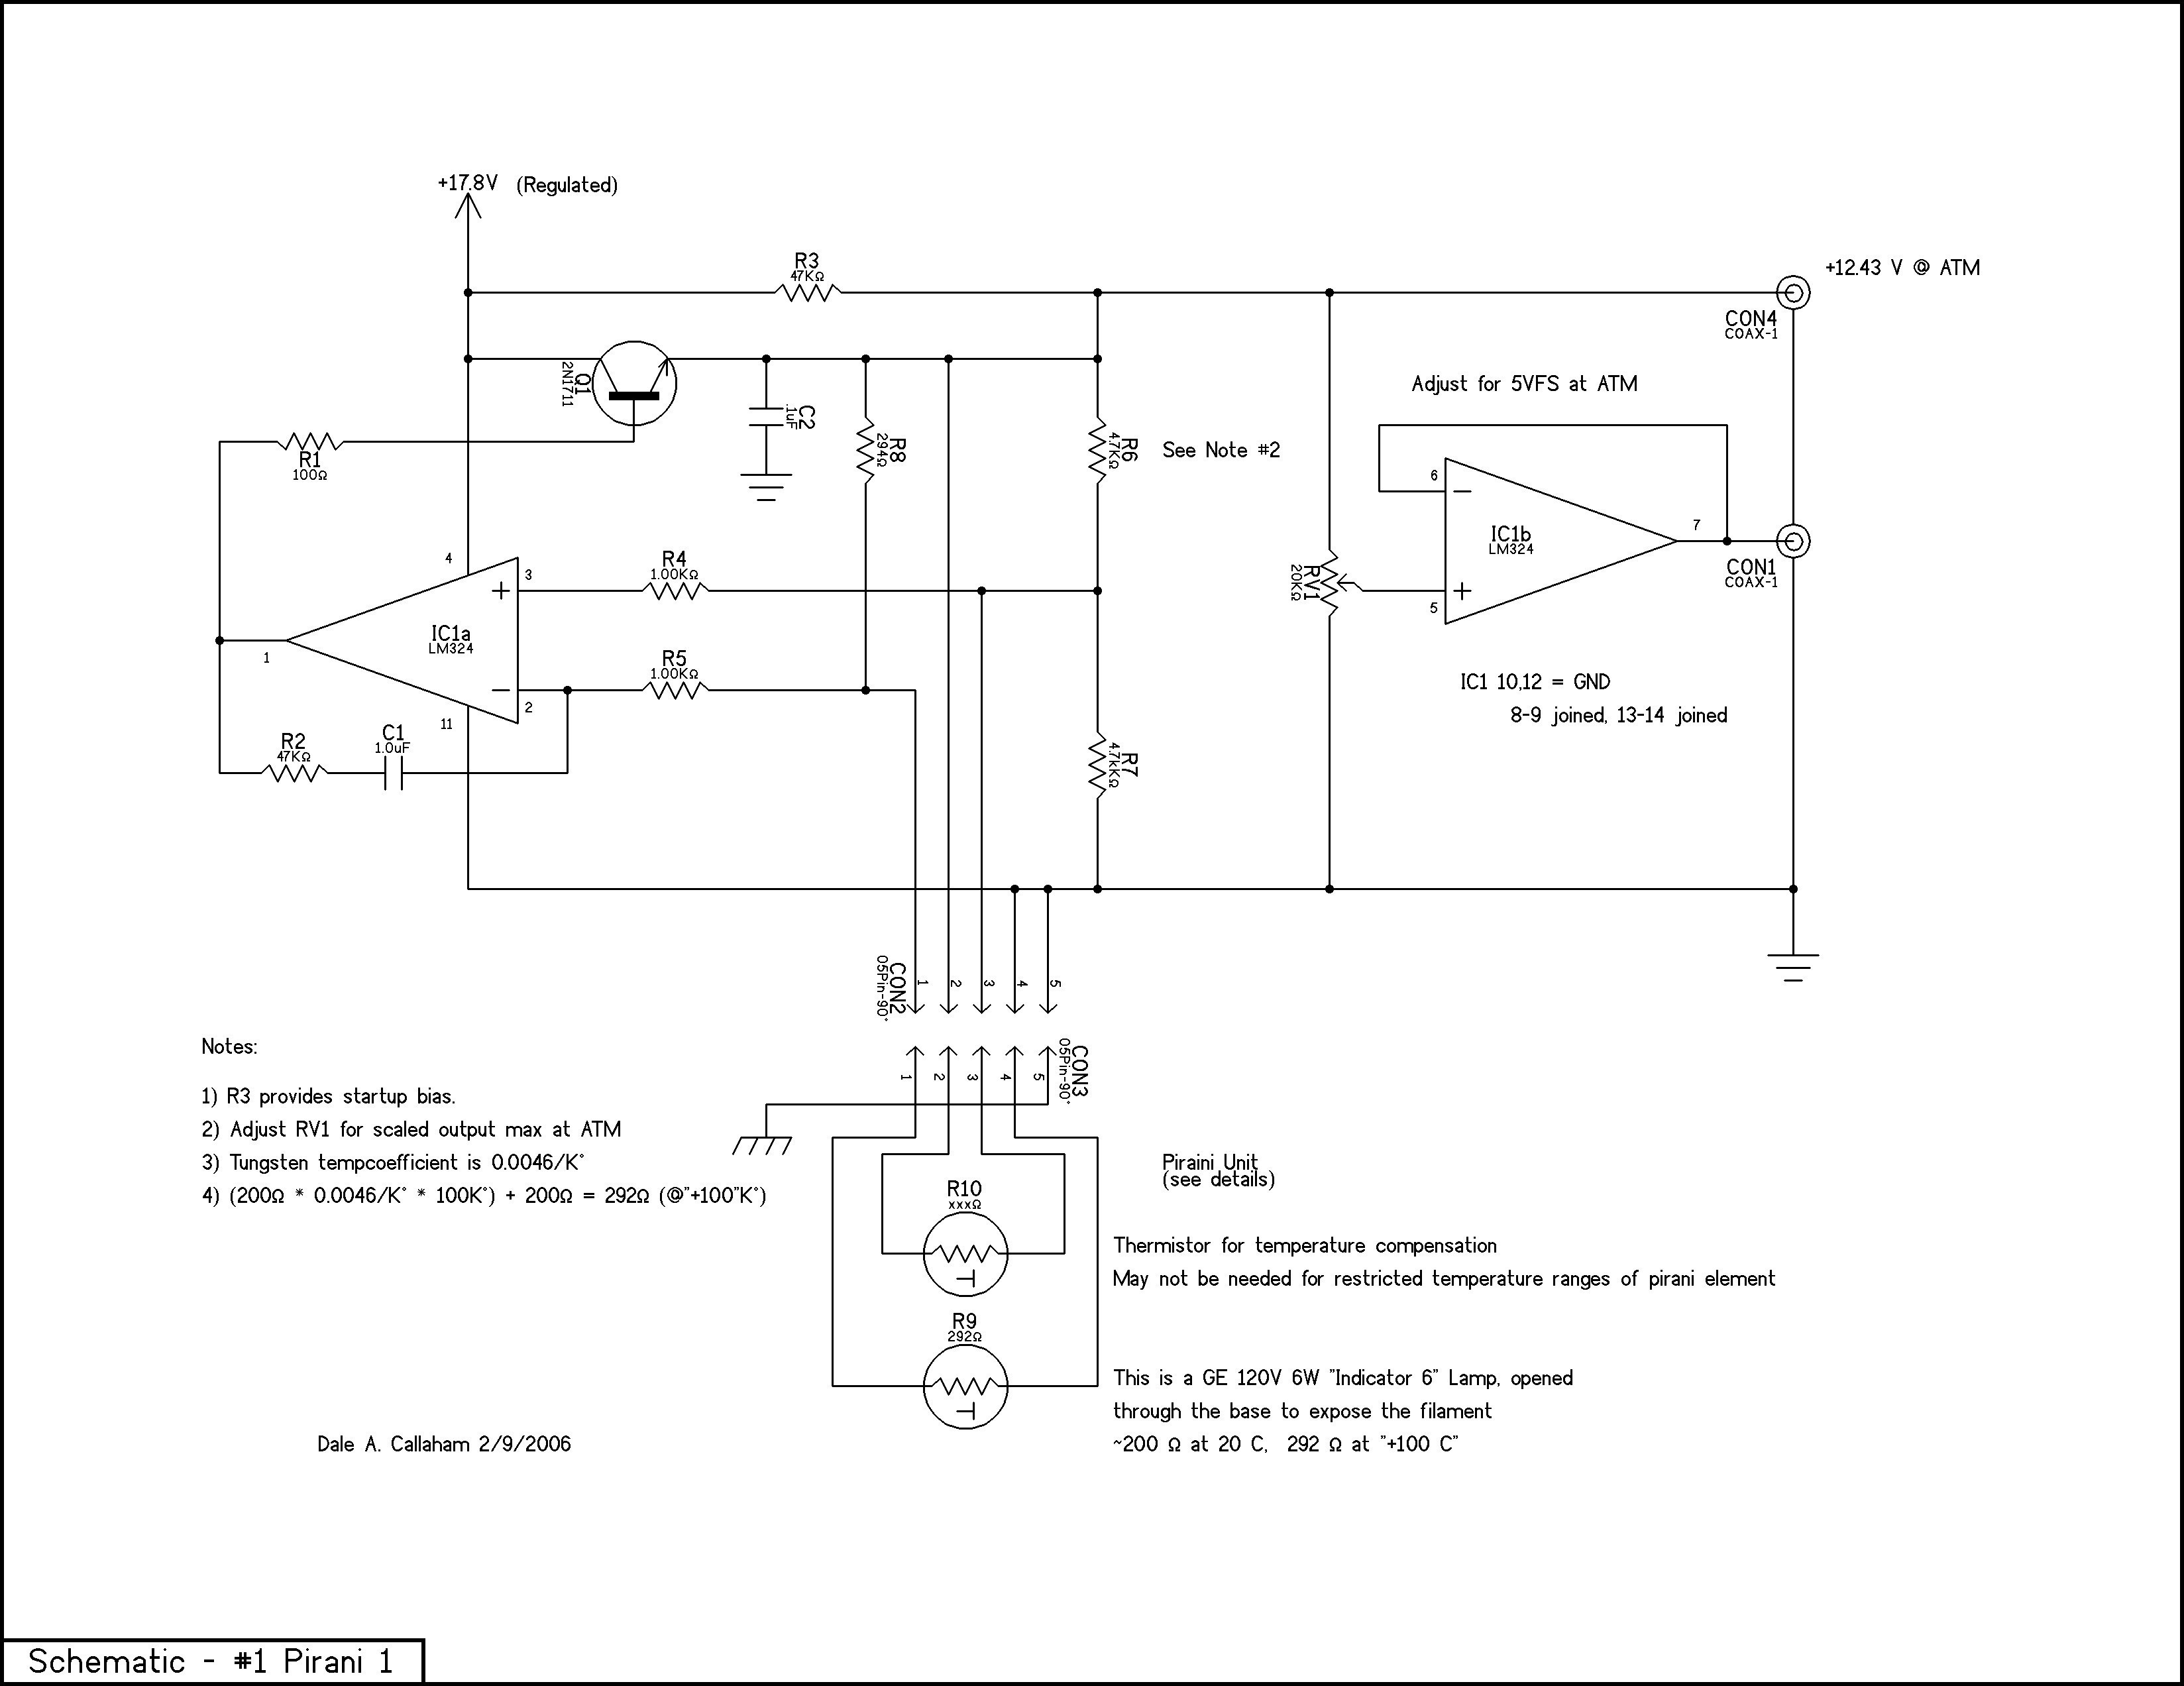 Wiring Diagram House Lights Best House Wiring Diagram Electrical Floor Plan 2004 2010 Bmw X3 E83 3 0d